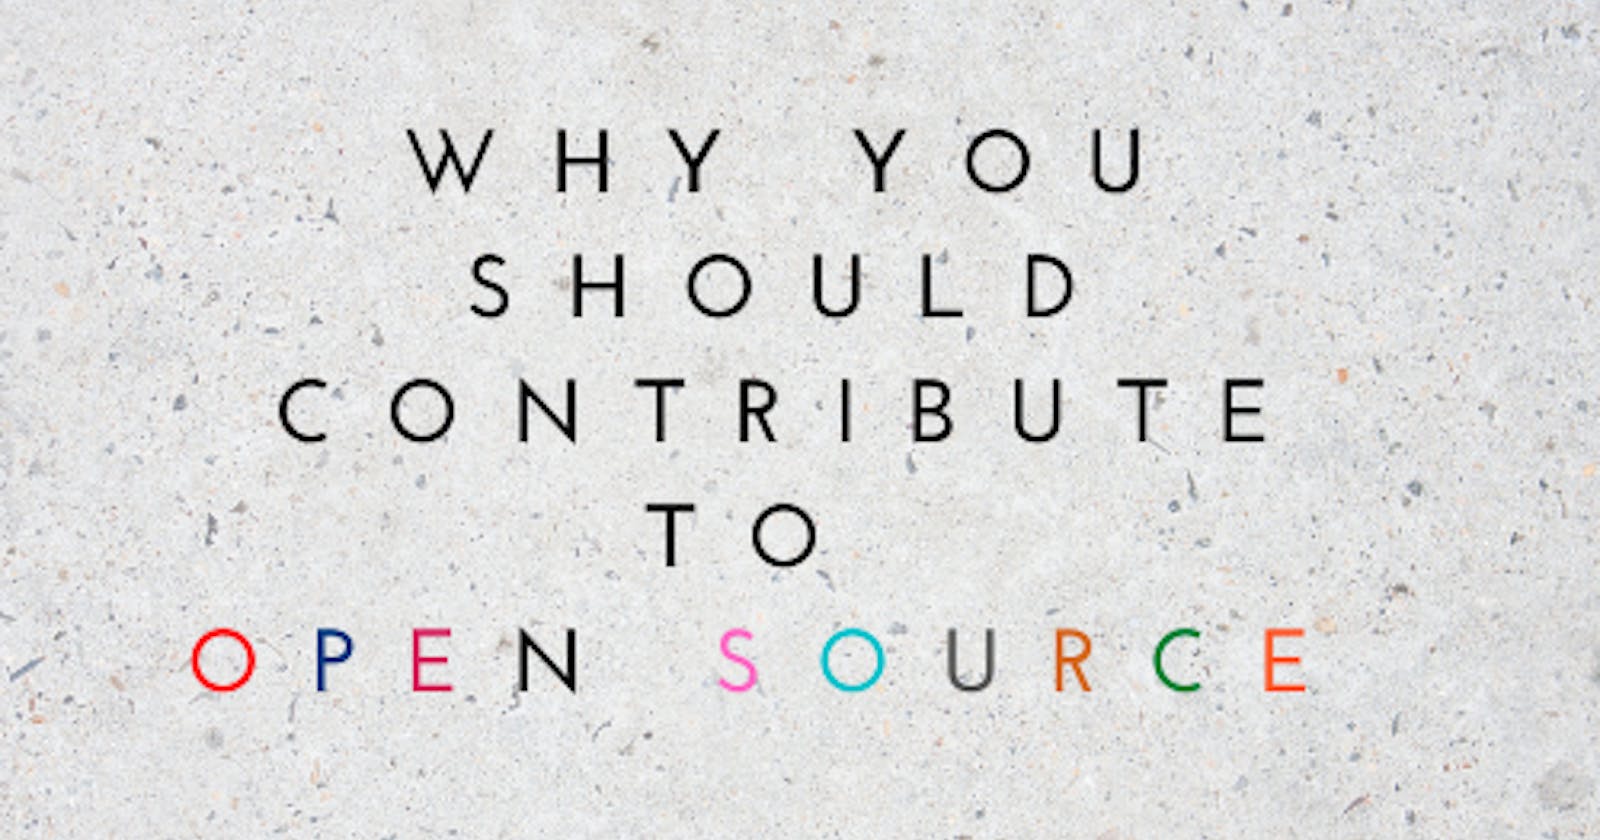 Why you should contribute to open source